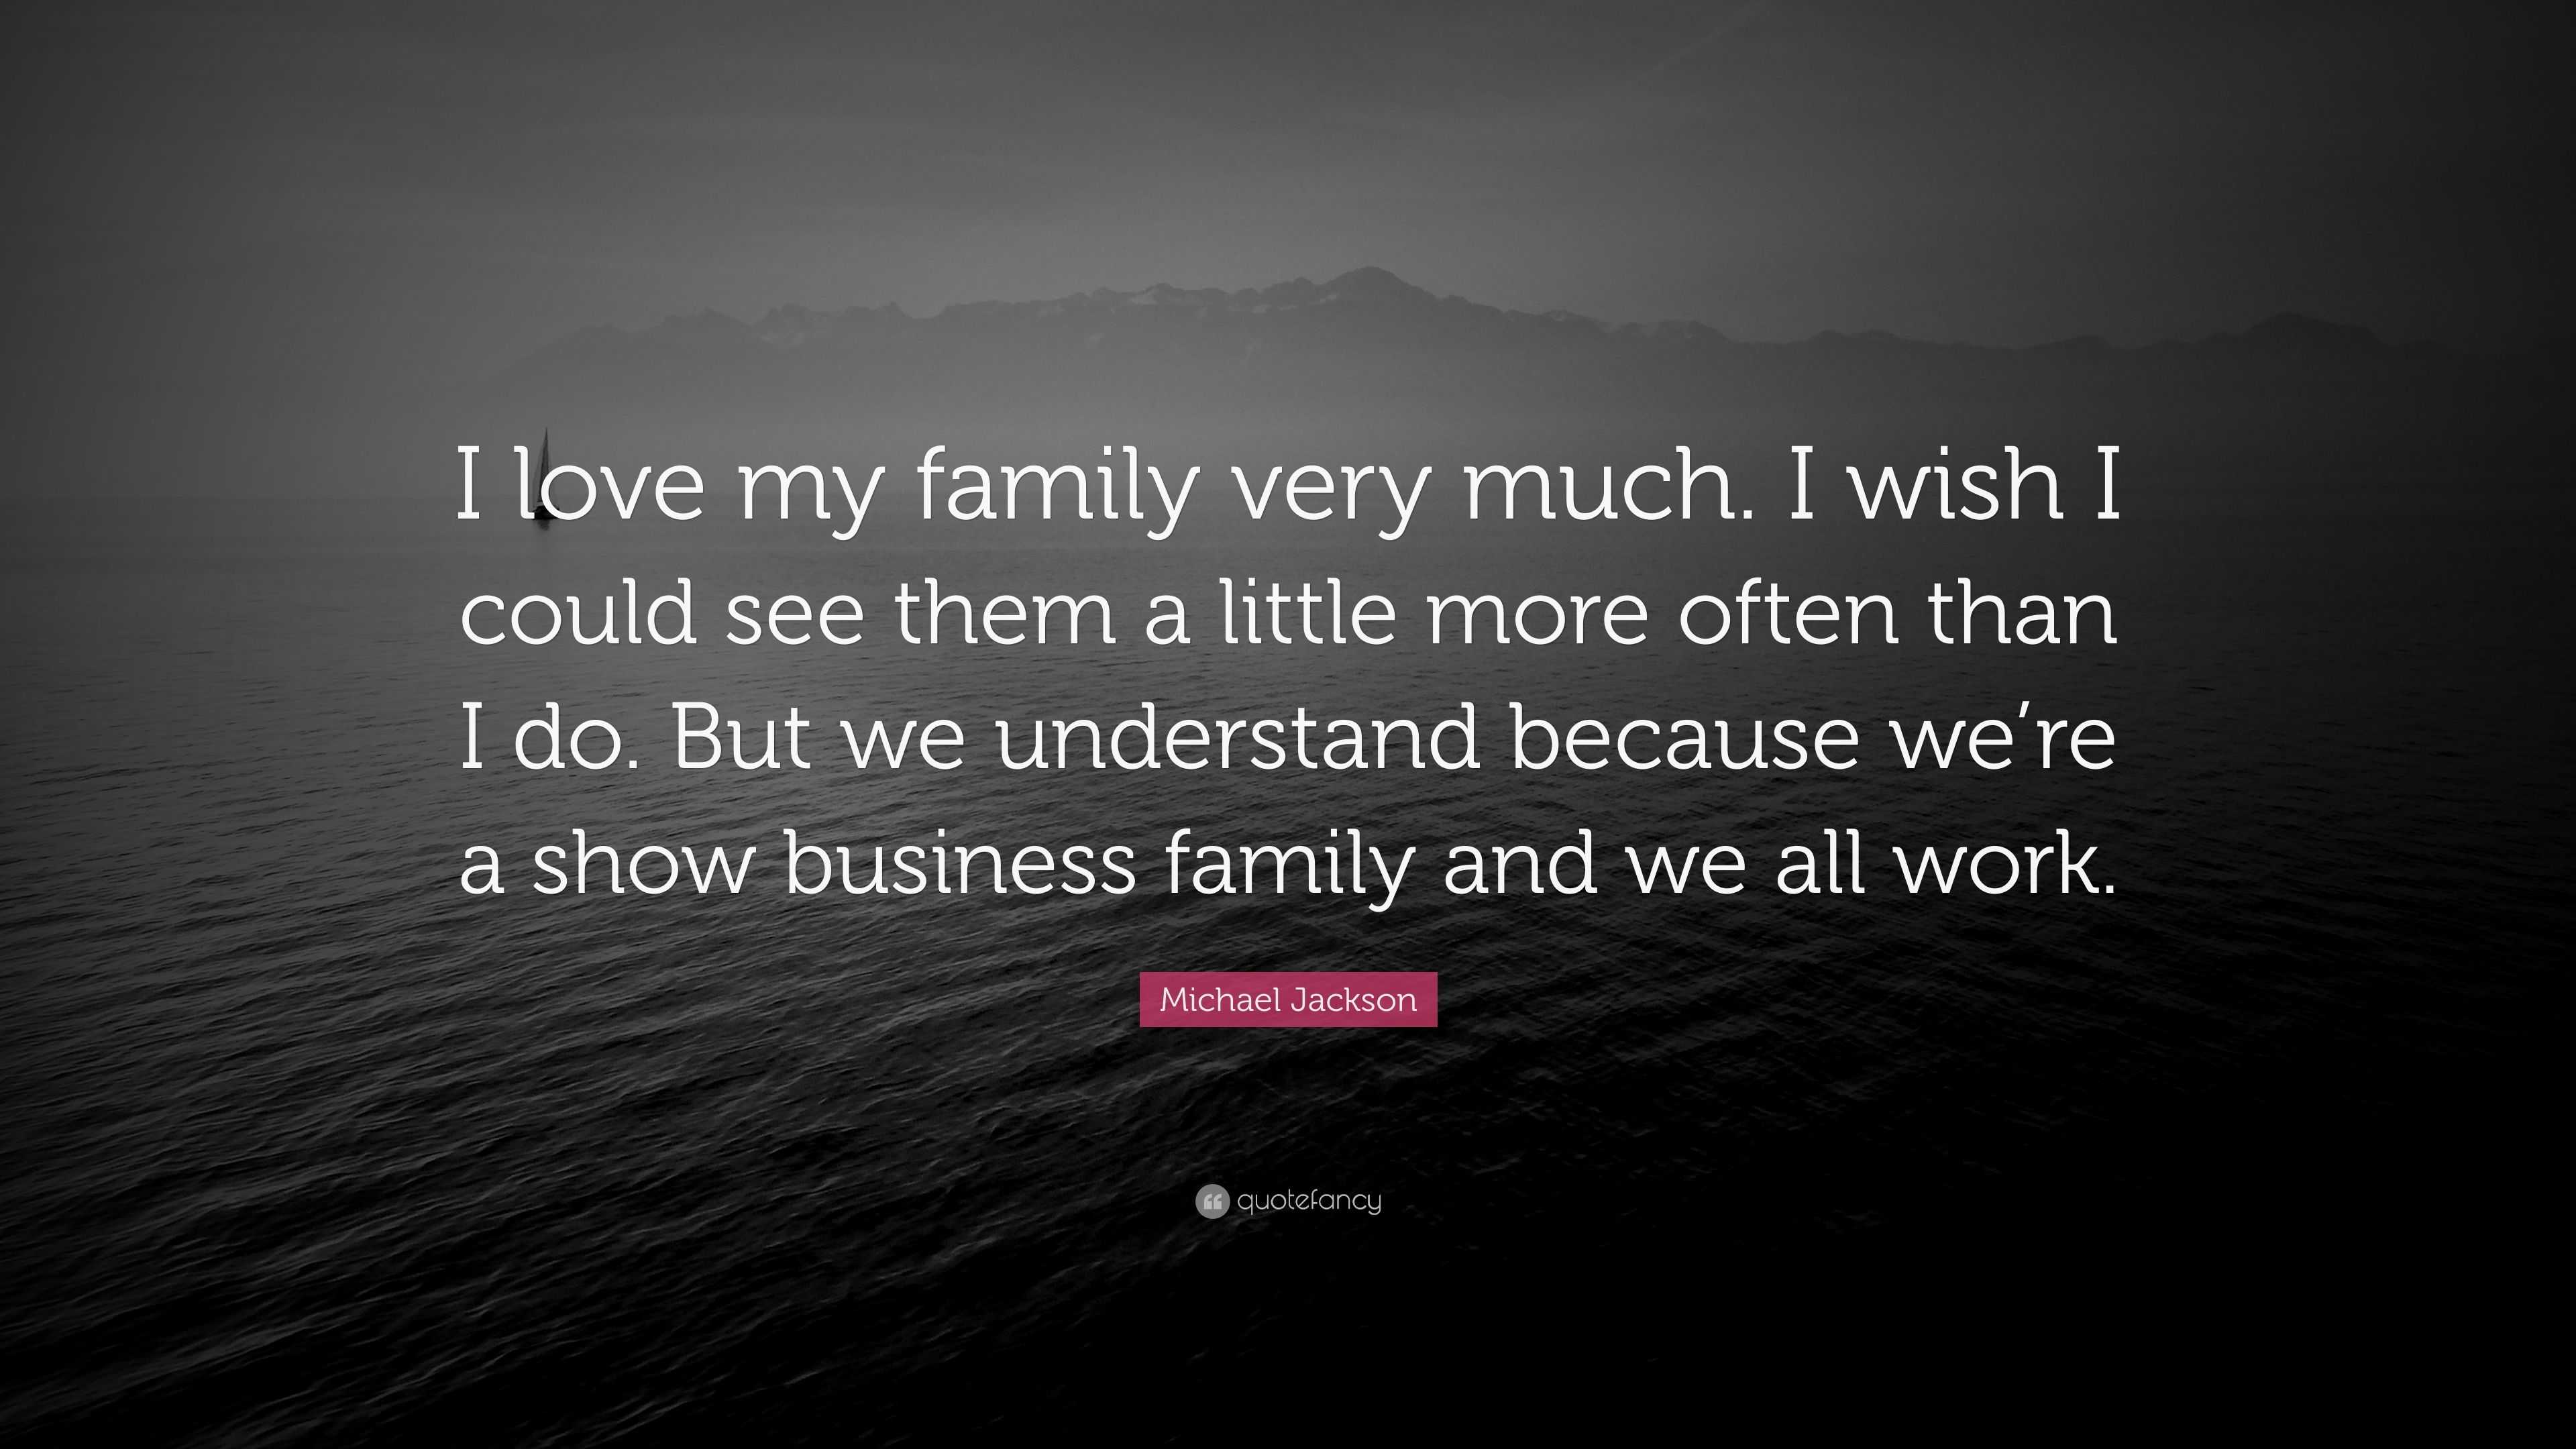 Michael Jackson Quote “I love my family very much I wish I could